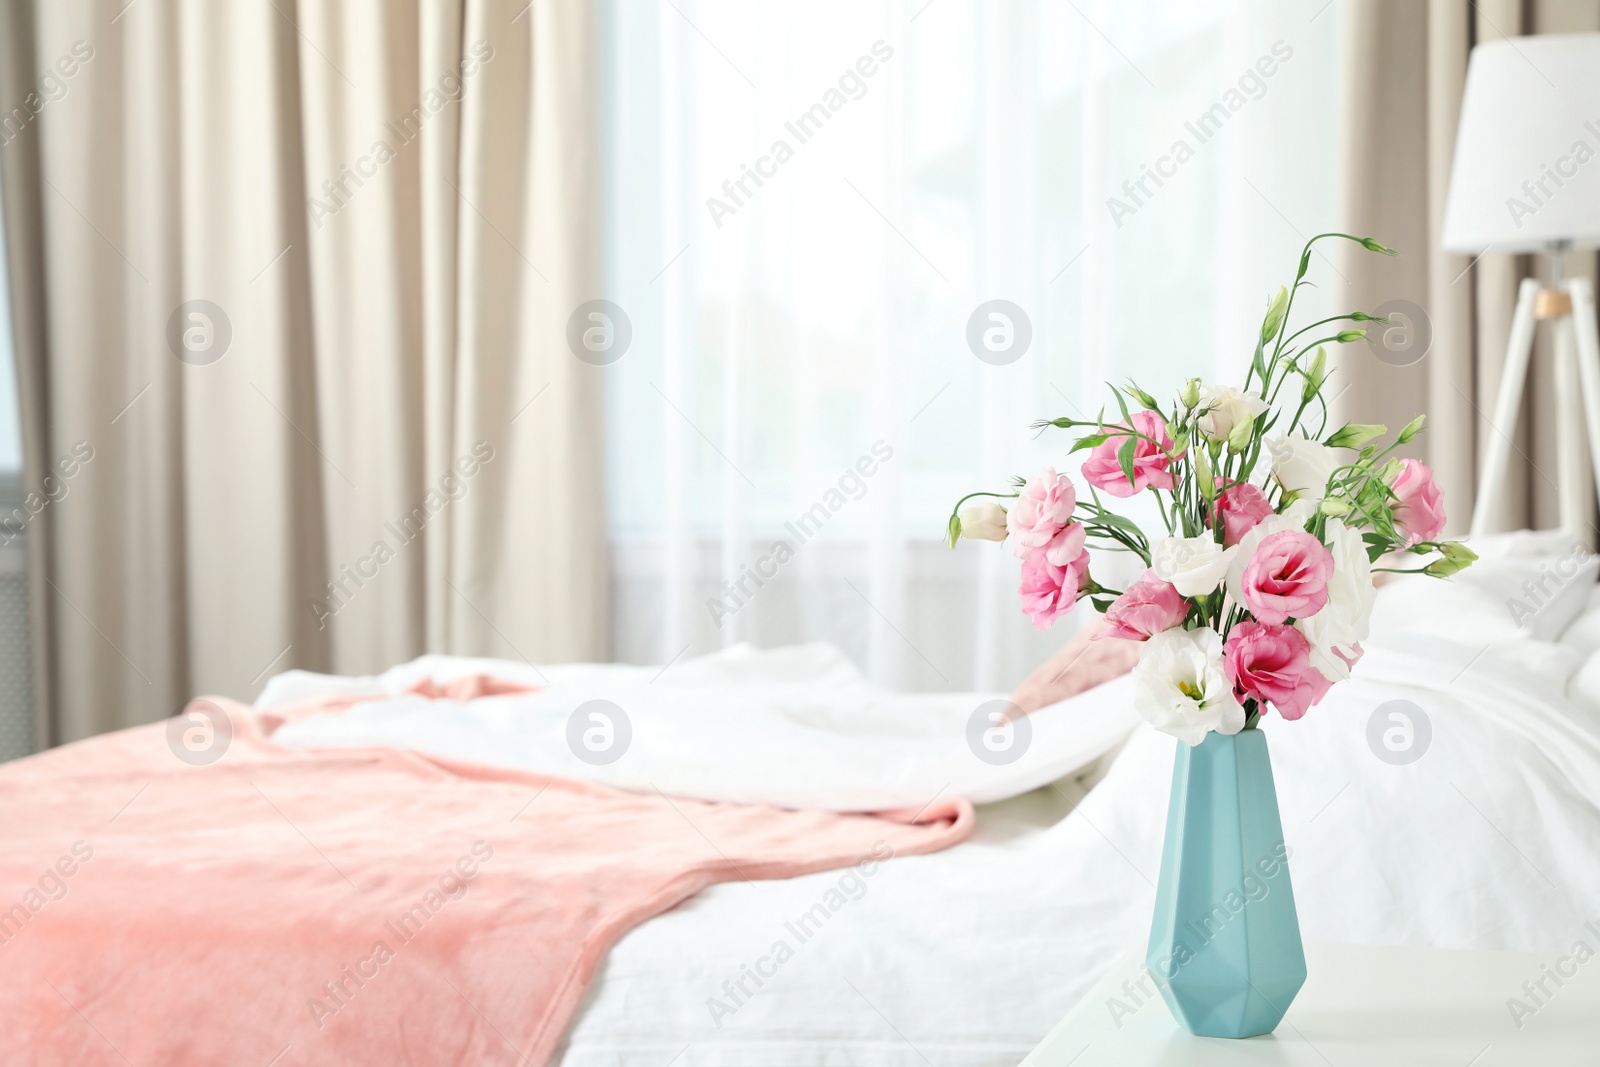 Photo of Vase with beautiful flowers on table in bedroom, space for text